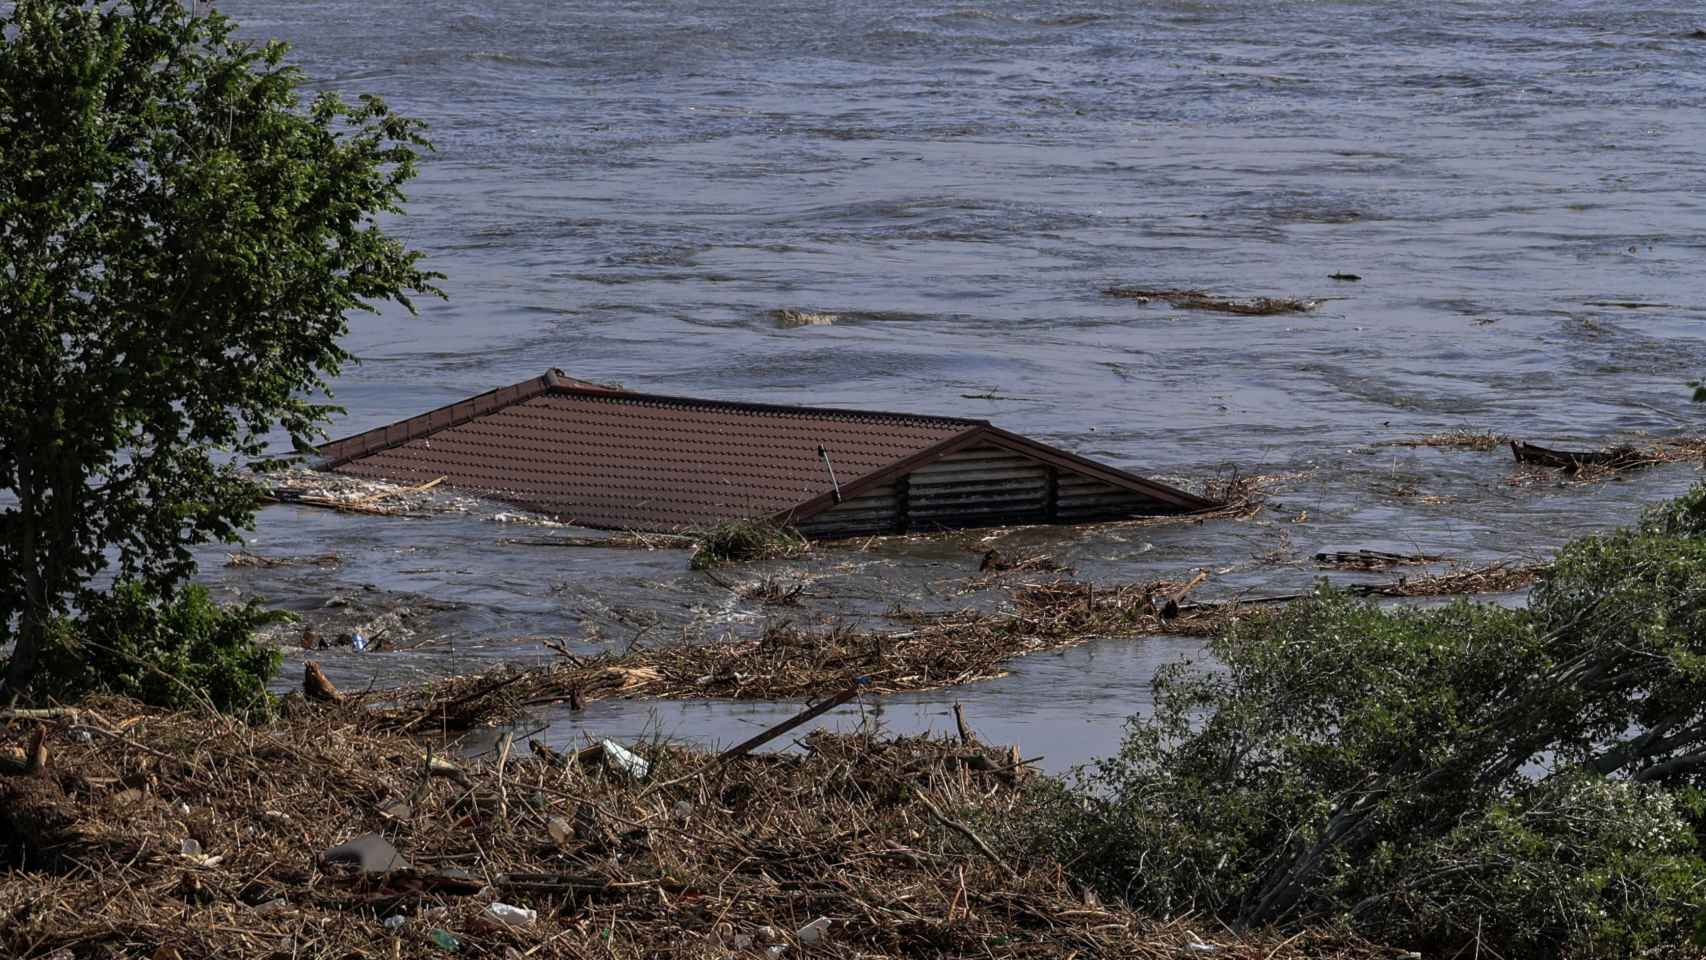 The collapse of the dam has flooded homes in nearby towns.